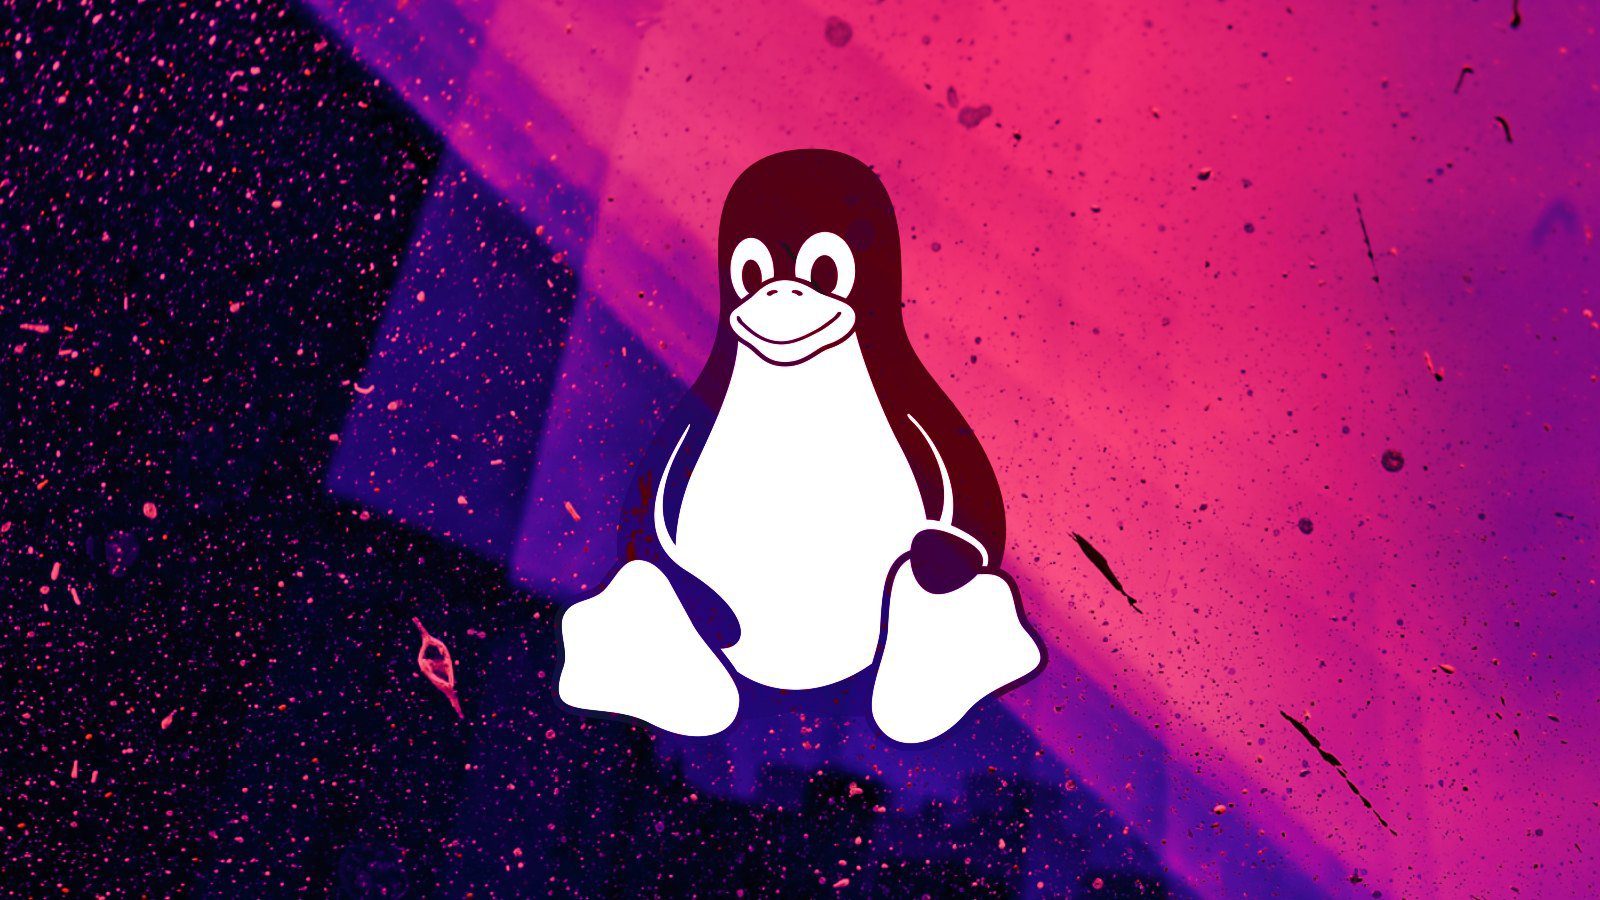 Stealthier version of Linux BPFDoor malware spotted in the wild – Source: www.bleepingcomputer.com